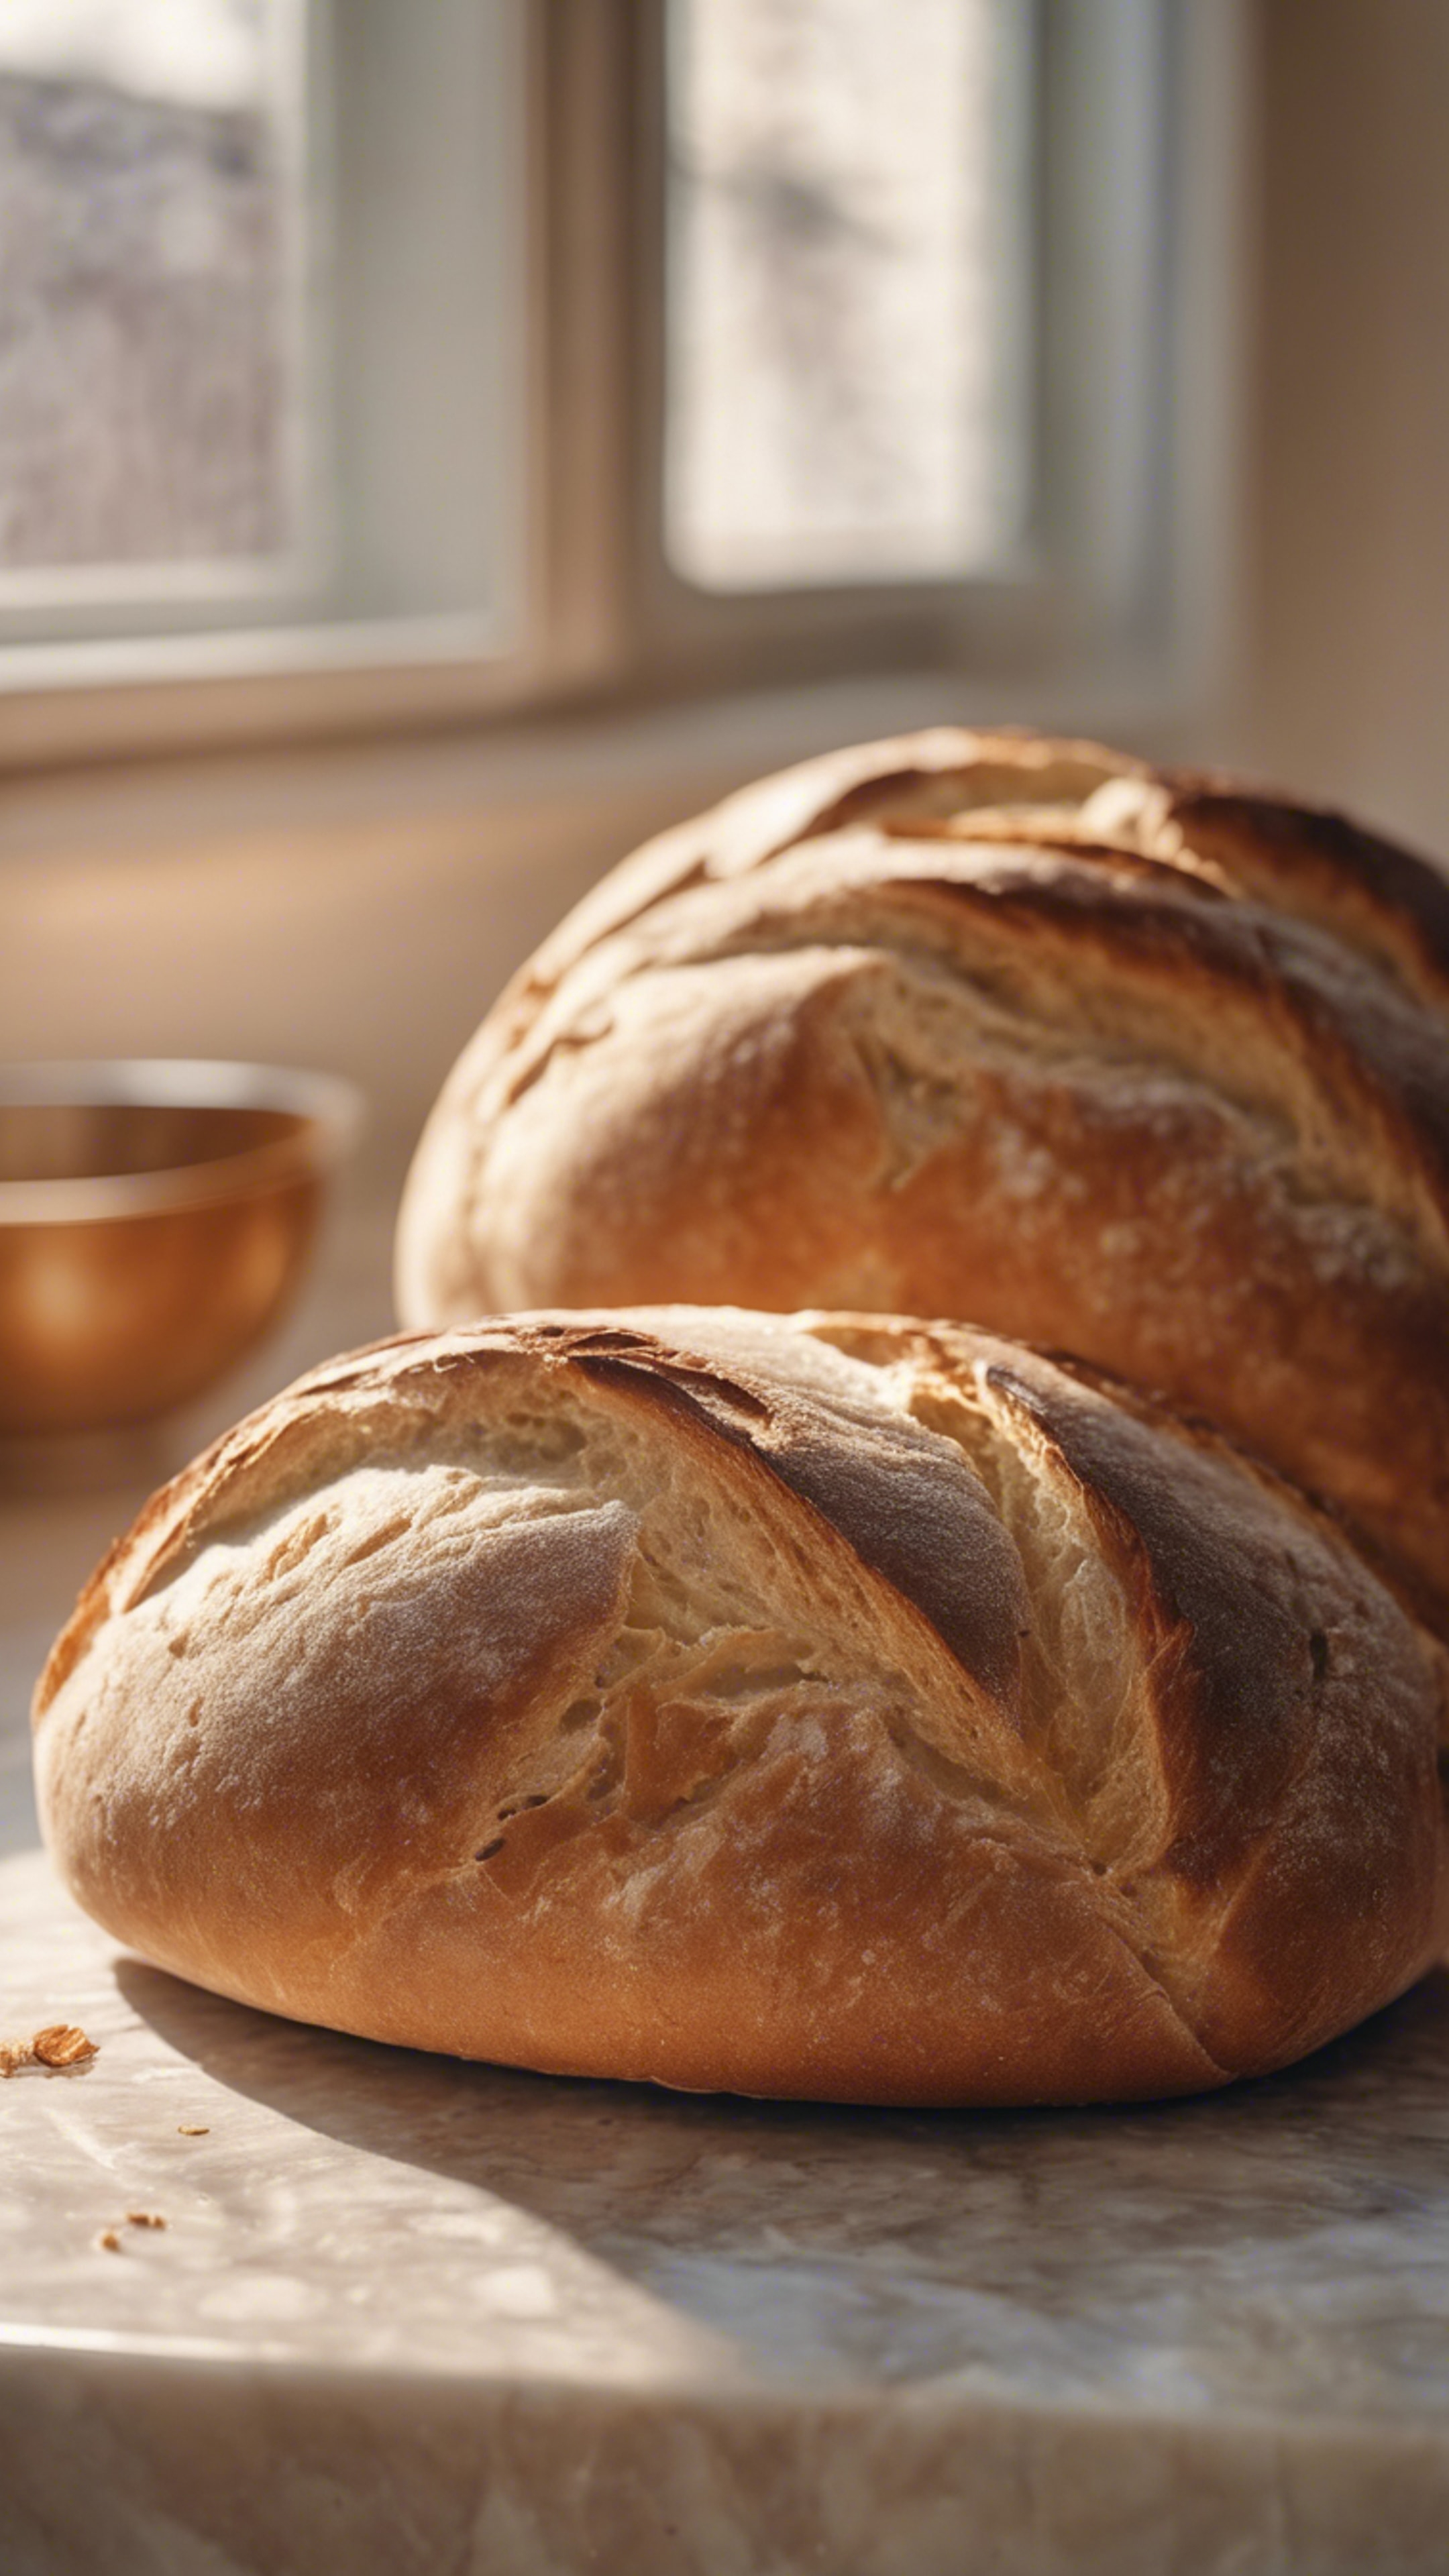 Freshly baked bread cooling on a beige marble countertop, with warm sunlight streaming in from the kitchen window. Wallpaper[7db45c5384474f76b12a]